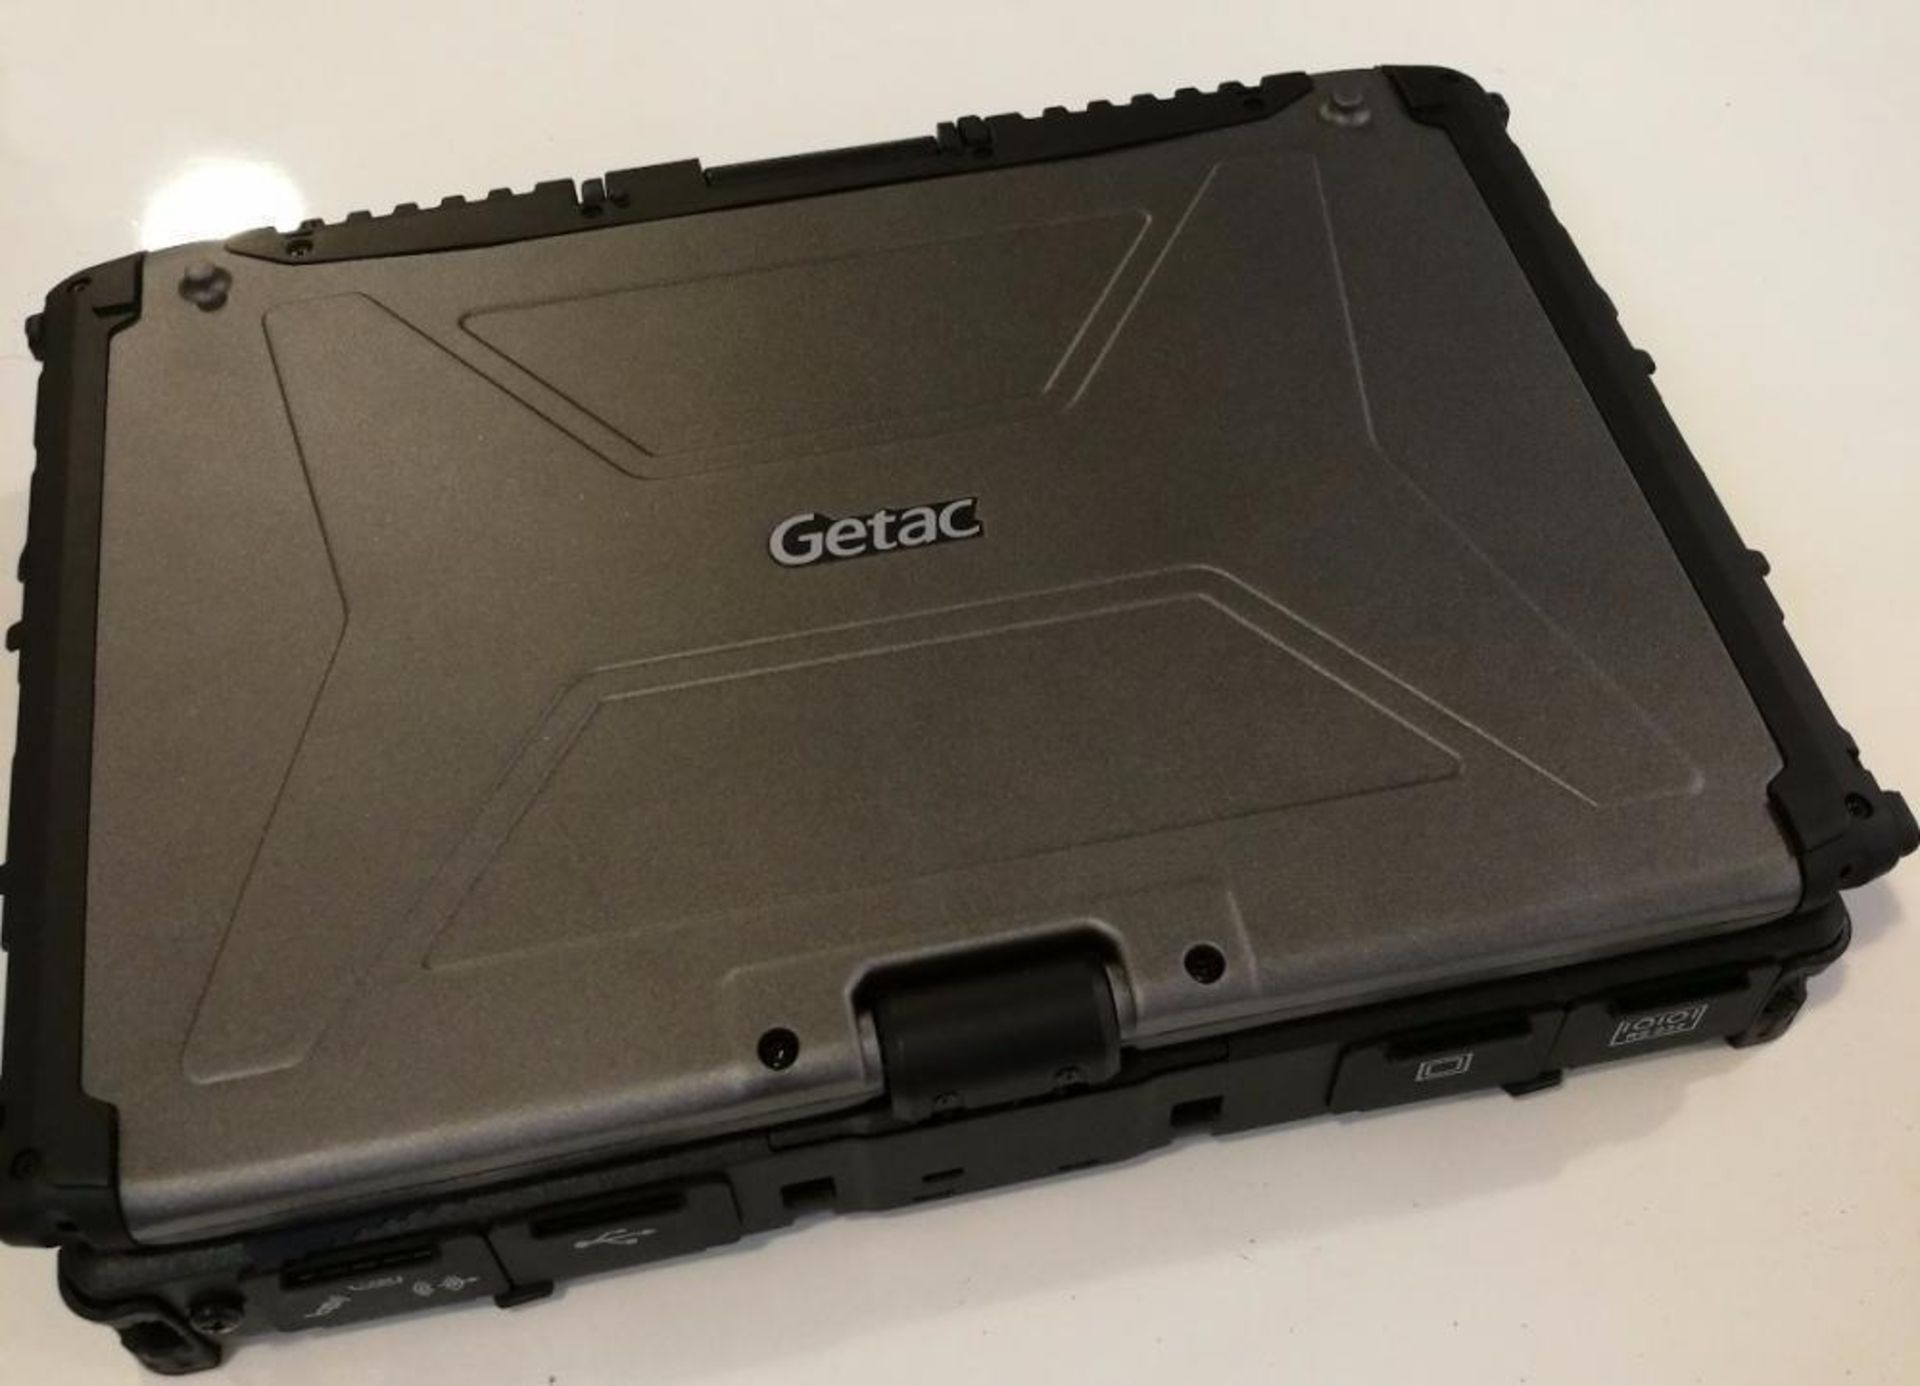 1 x Getac V200 Rugged Laptop Computer - Rugged Laptop That Transforms into a Tablet PC - Features an - Bild 2 aus 7